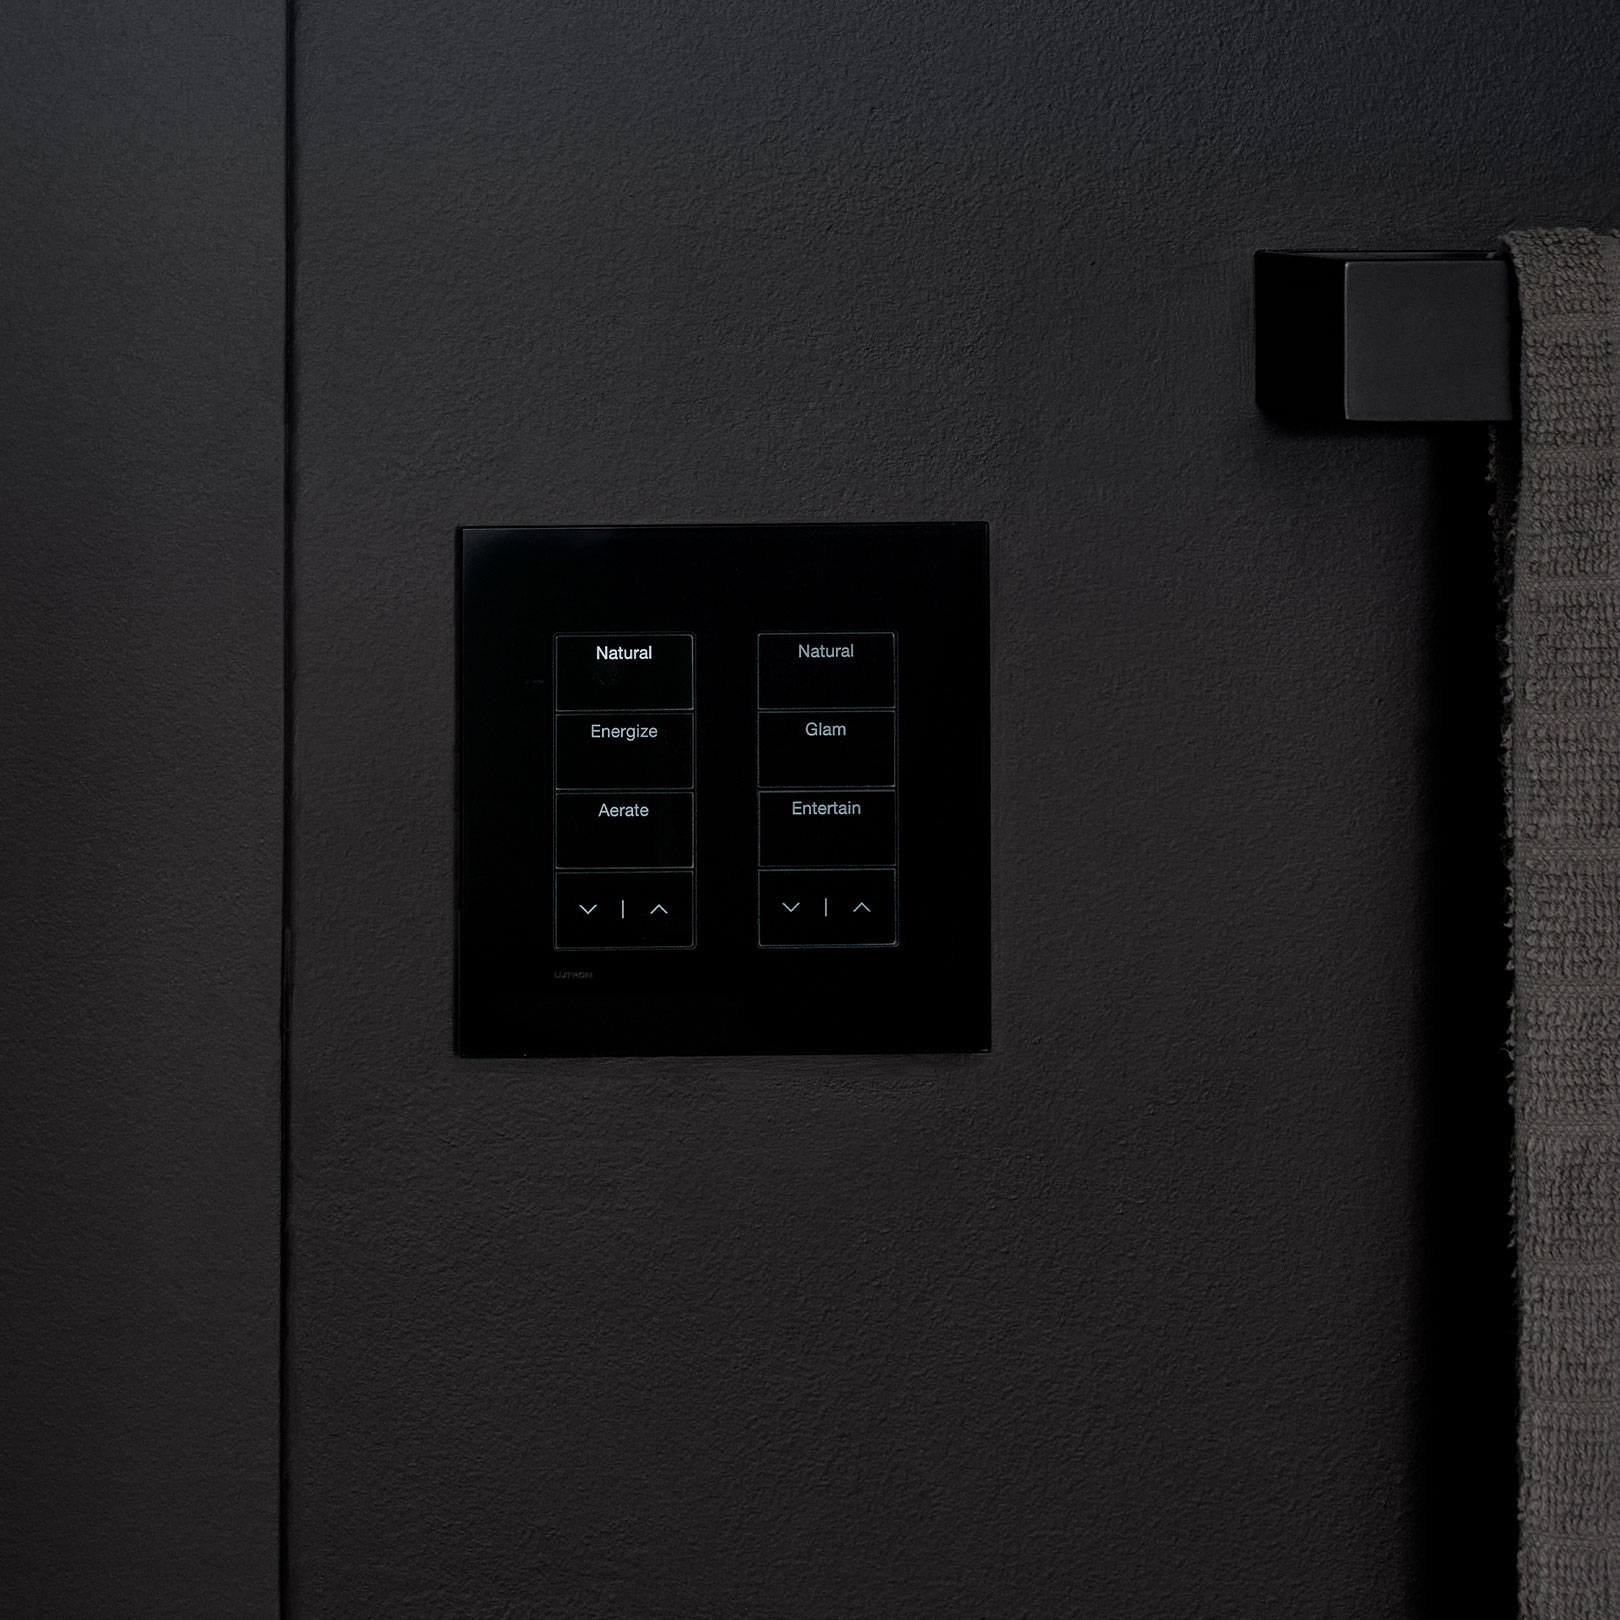 Keypad lighting control allows homeowner to change lighting scene at push of a button